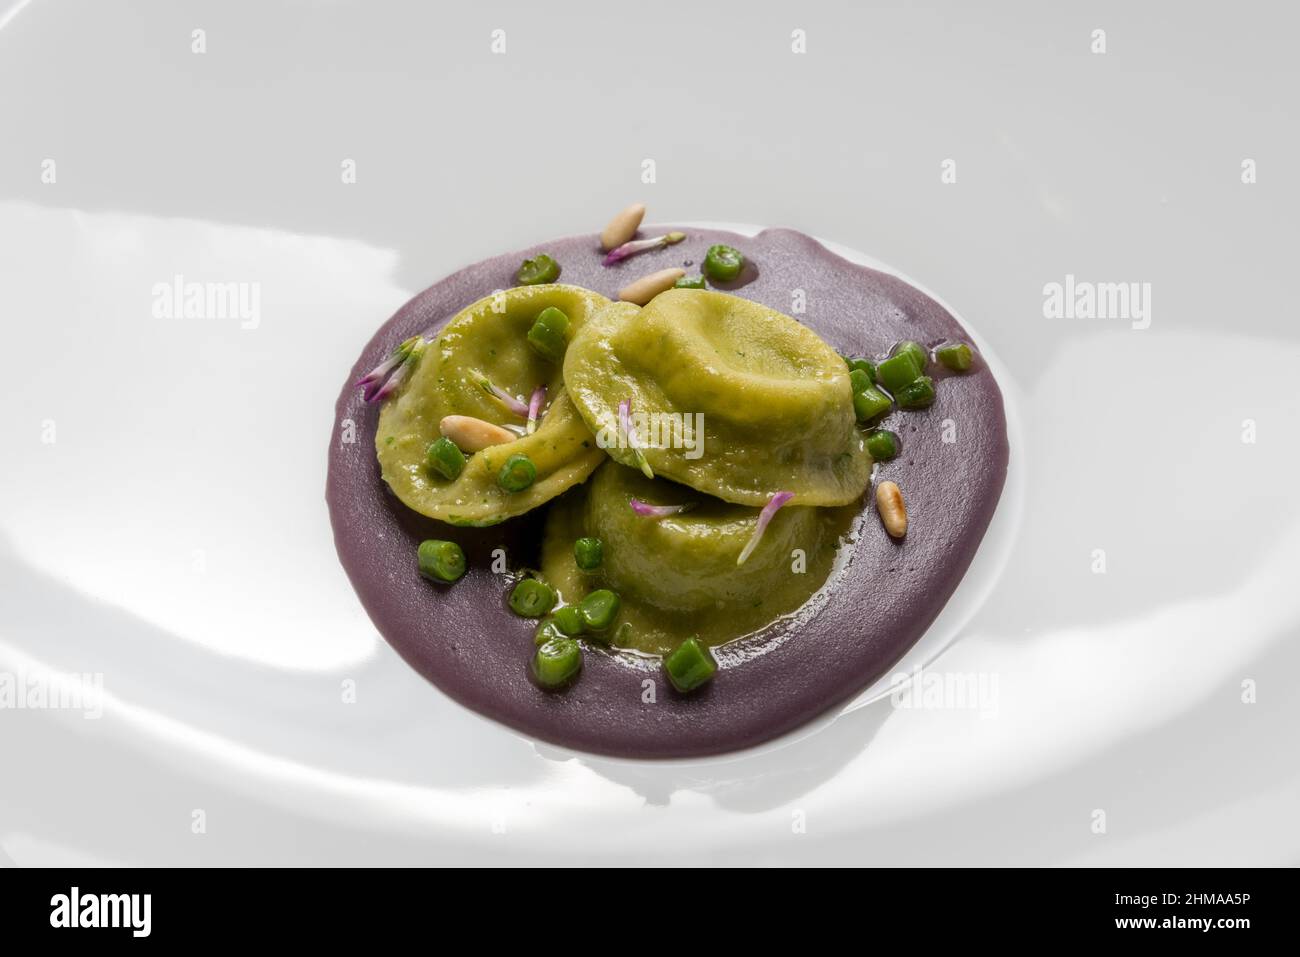 Green spinach tortelloni filled with cheese and vegetables, on beetroot puree with peas and pine nuts, close up Stock Photo